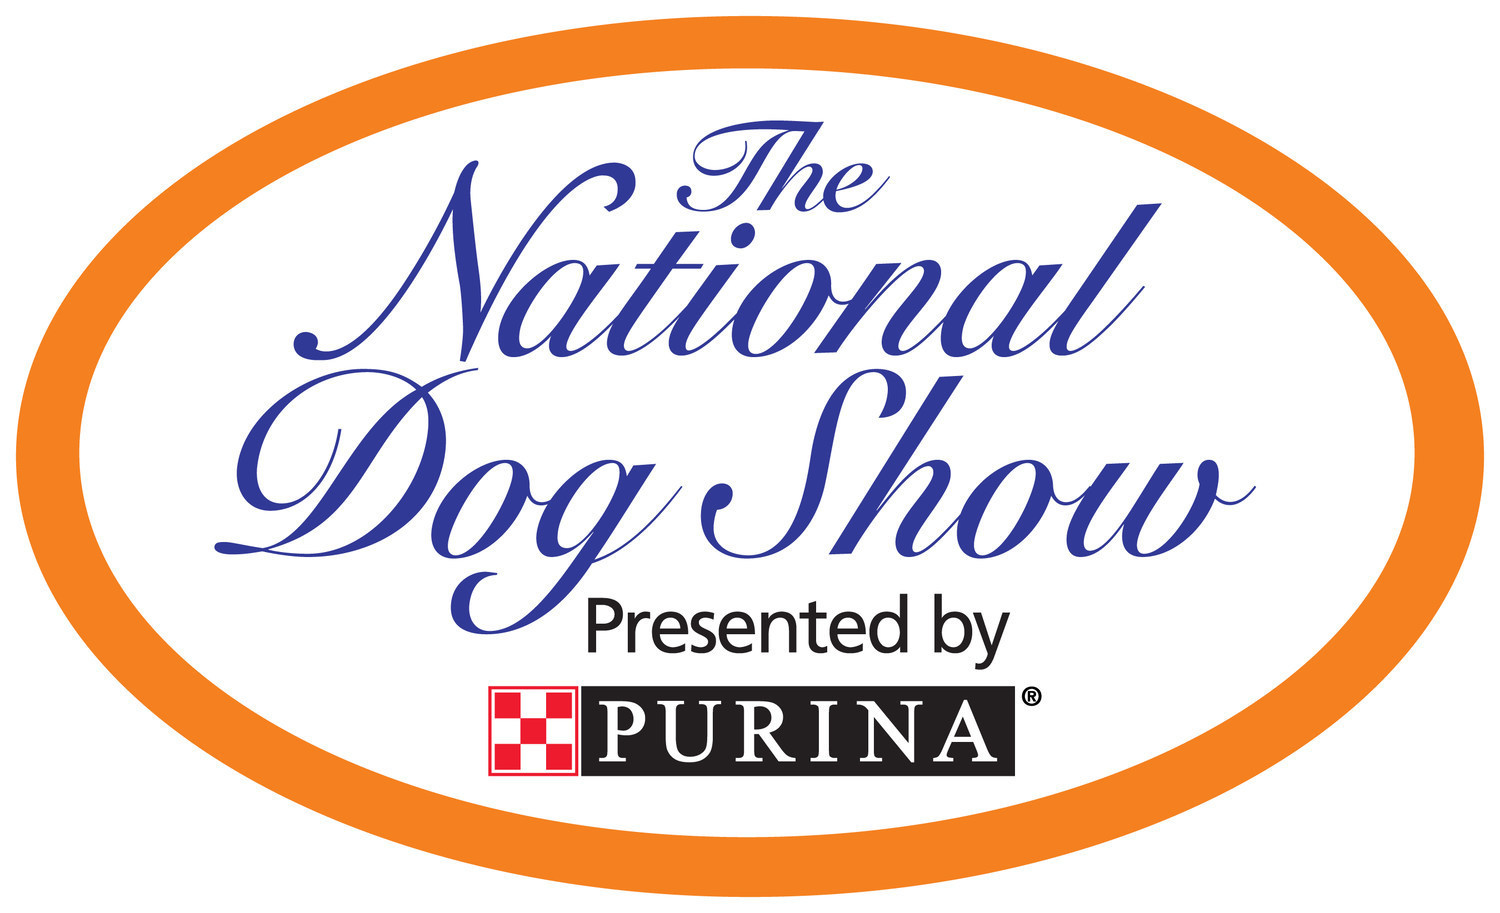 Purina Hosting Sweepstakes to Celebrate the 21st Annual National Dog